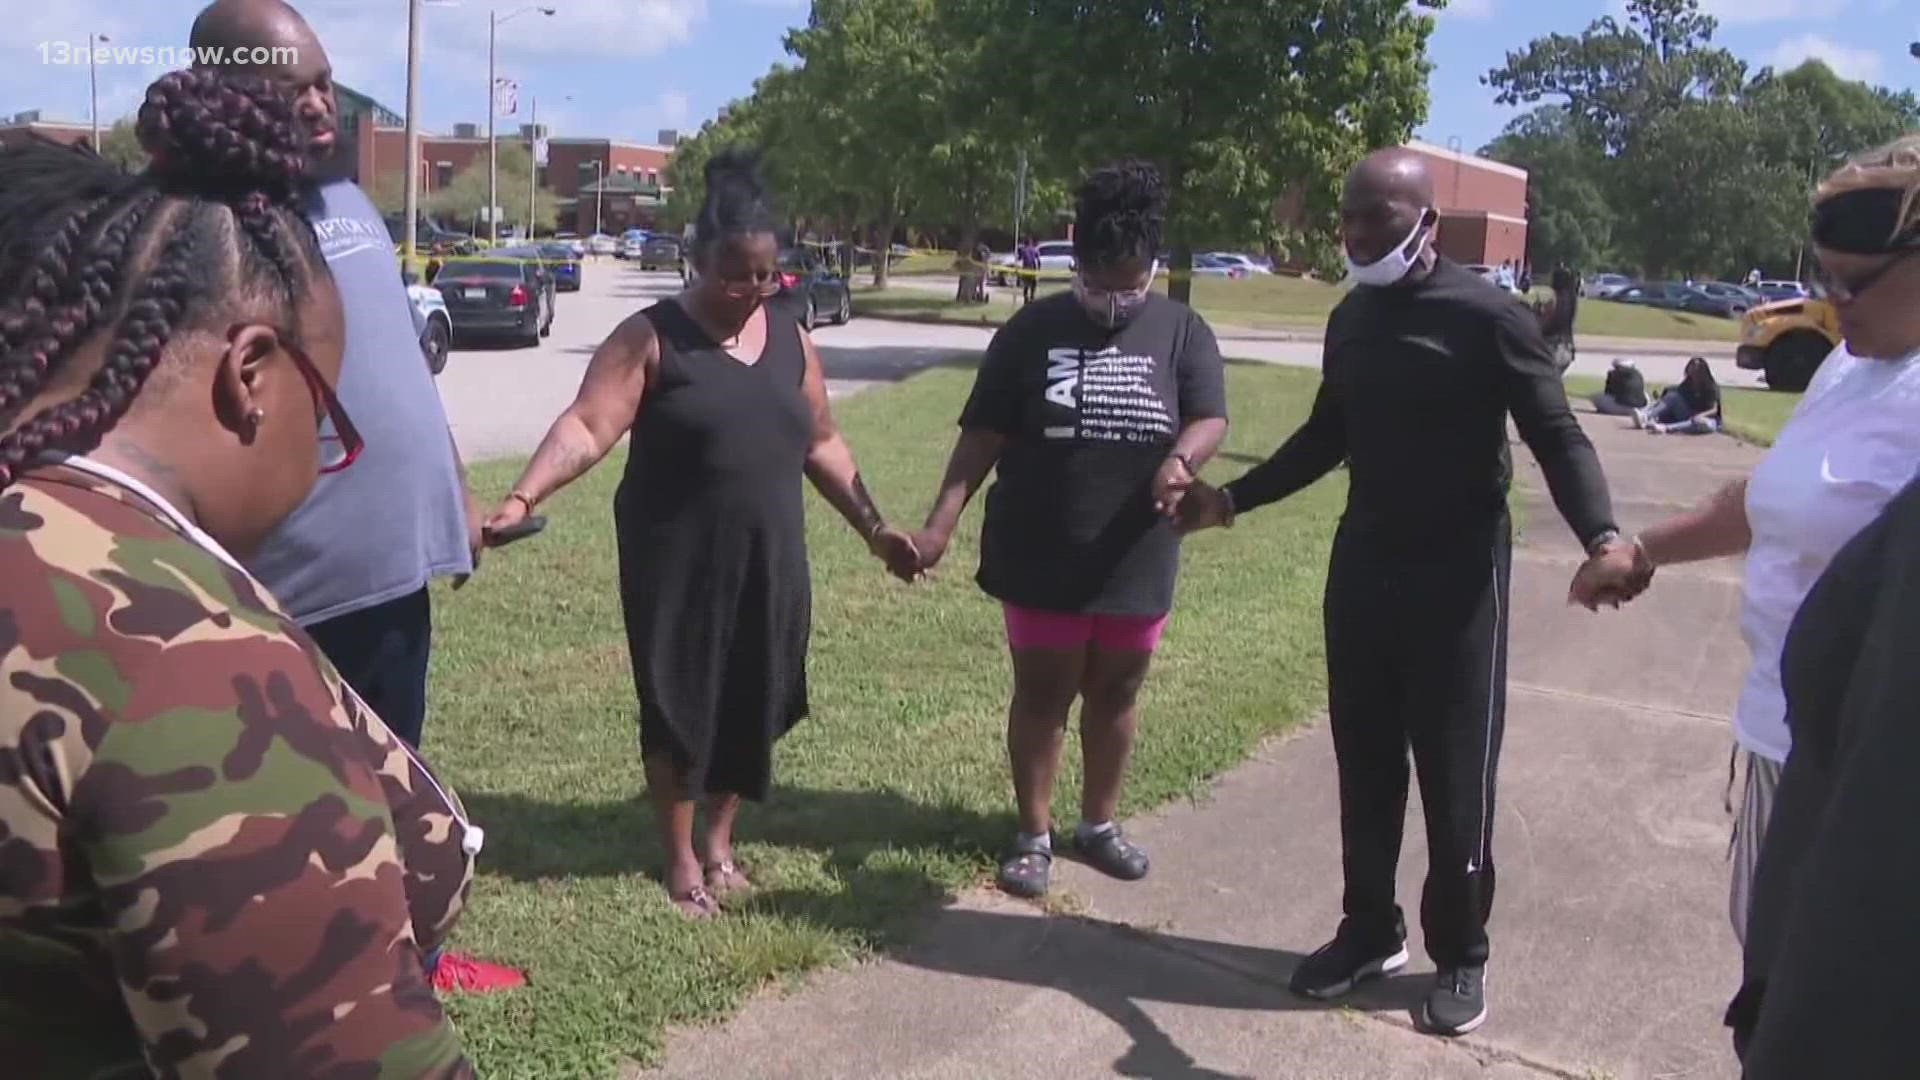 Parents and loved ones swarmed the school grounds, panicked as they rushed to find their kids after two 17-year-olds were shot on Monday morning.